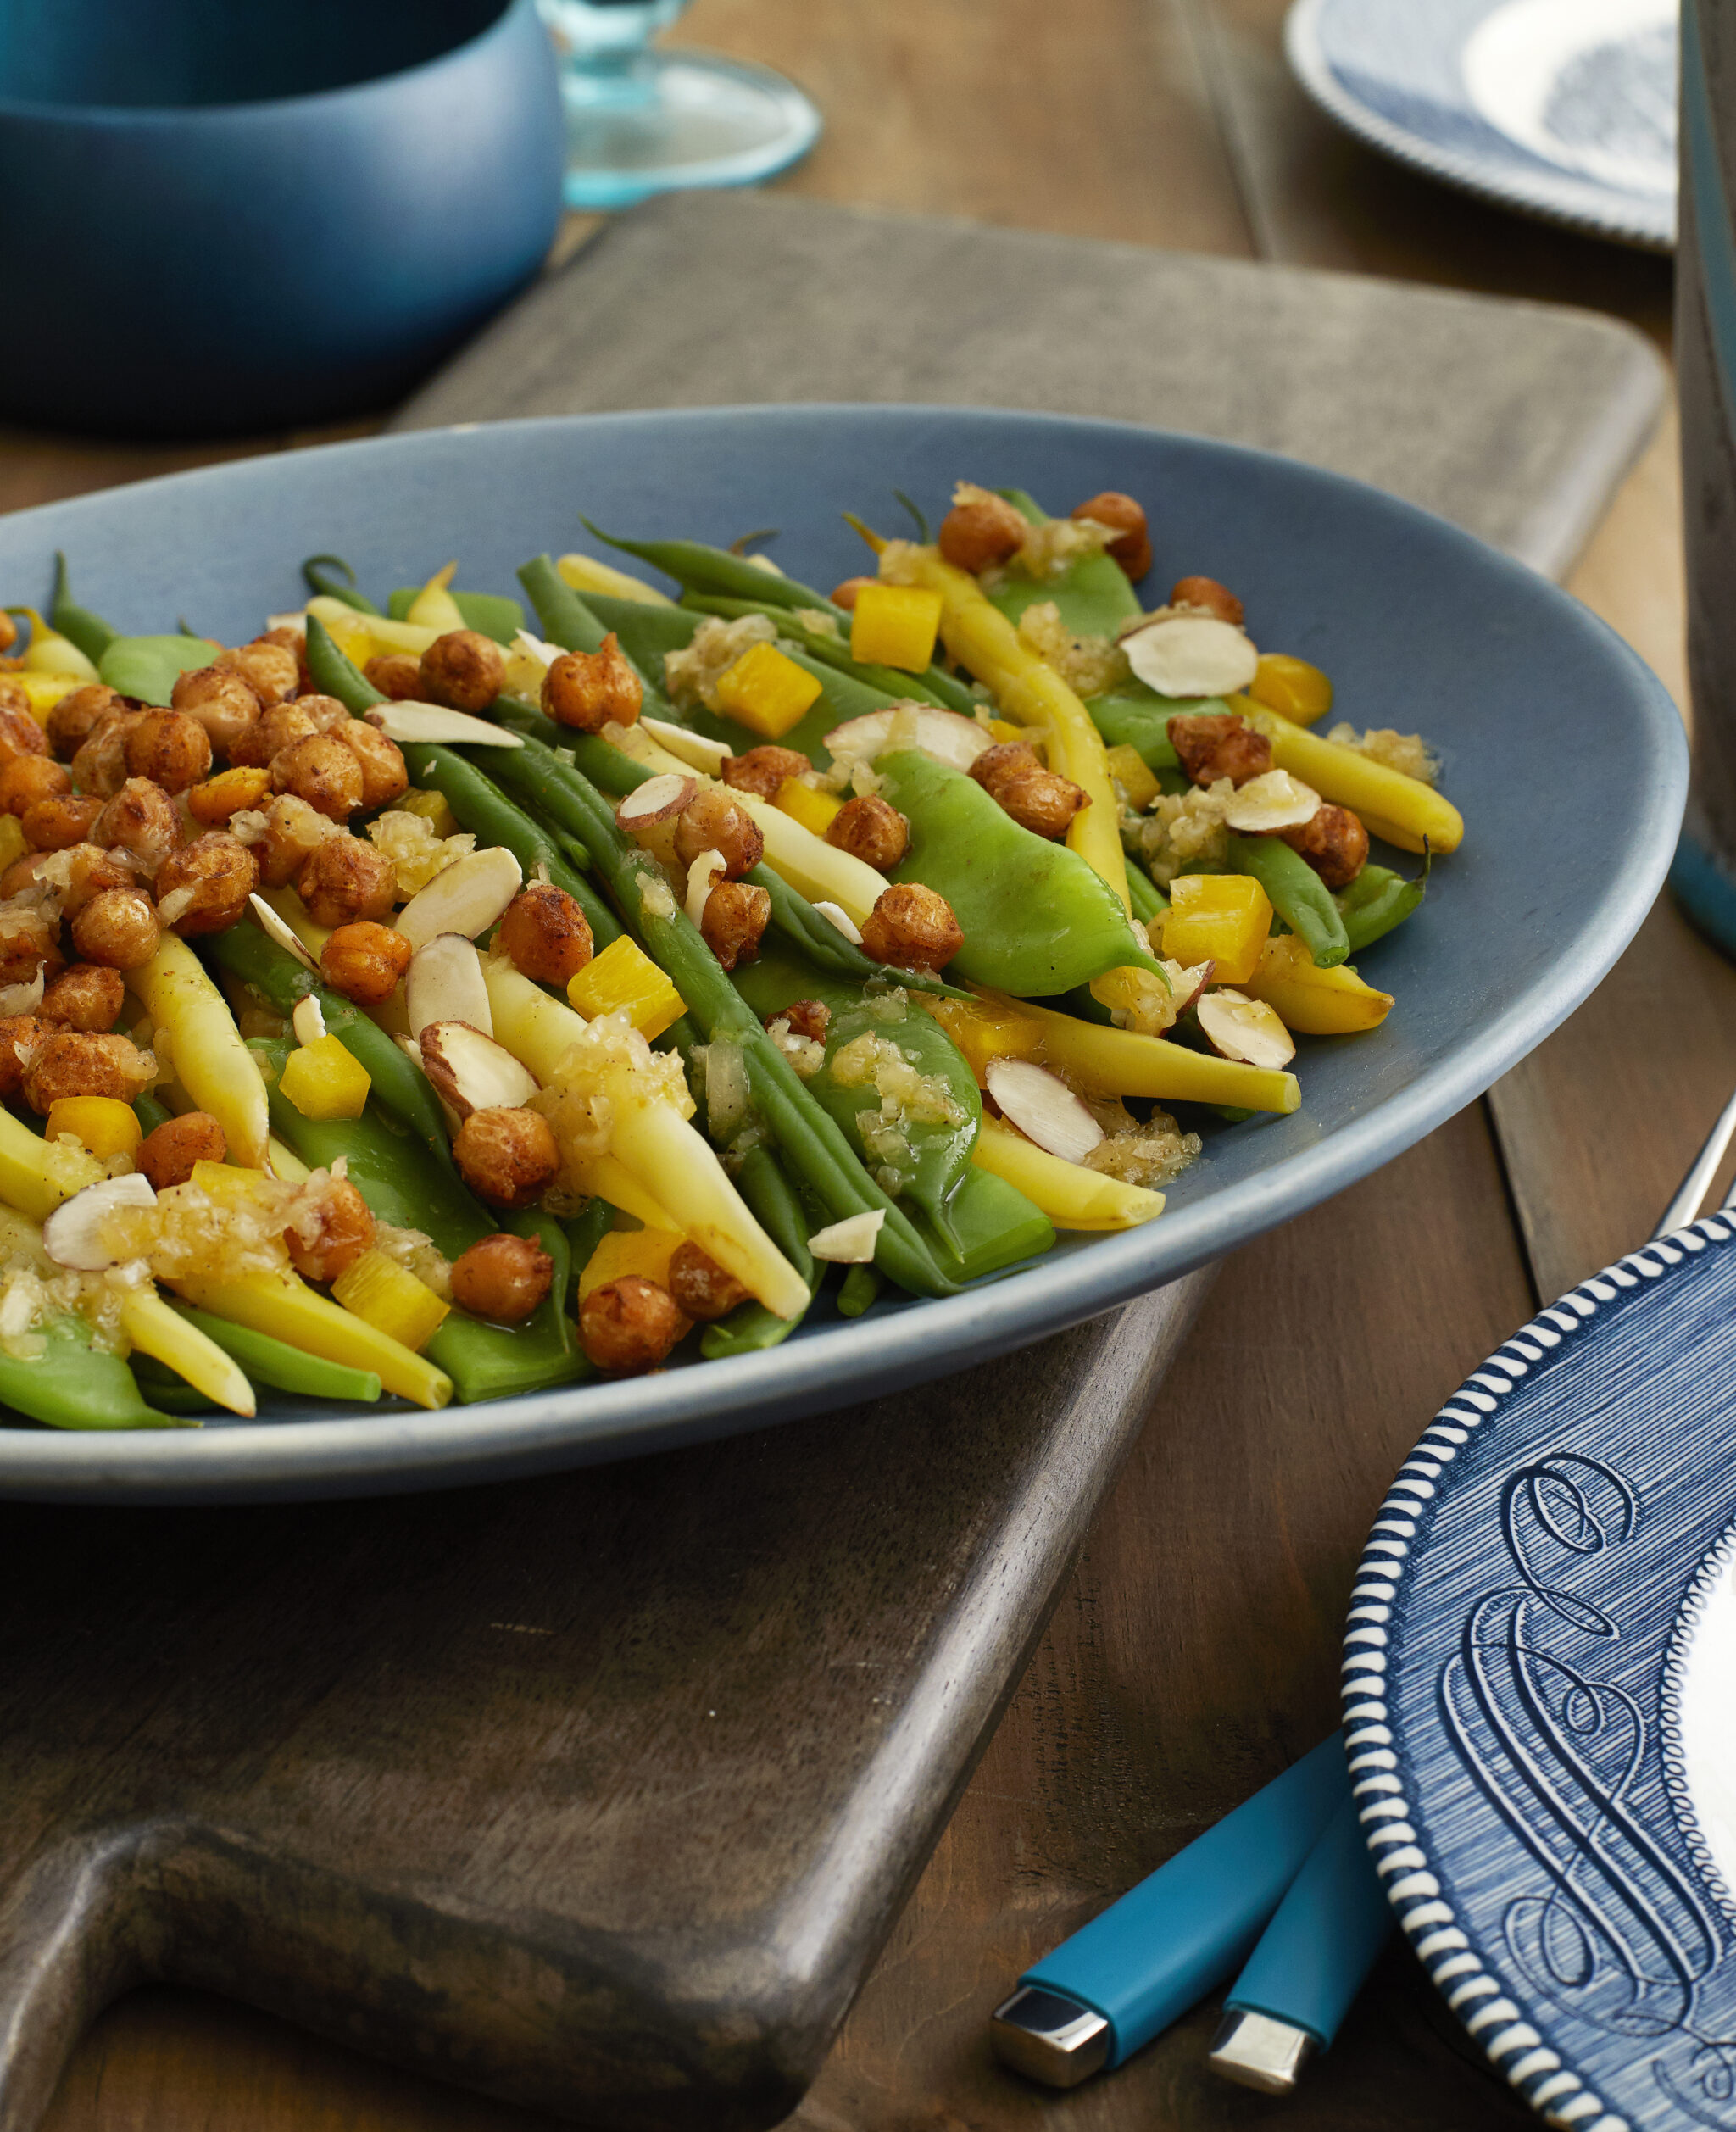 Simple Green Bean Salad by Christine Tizzard